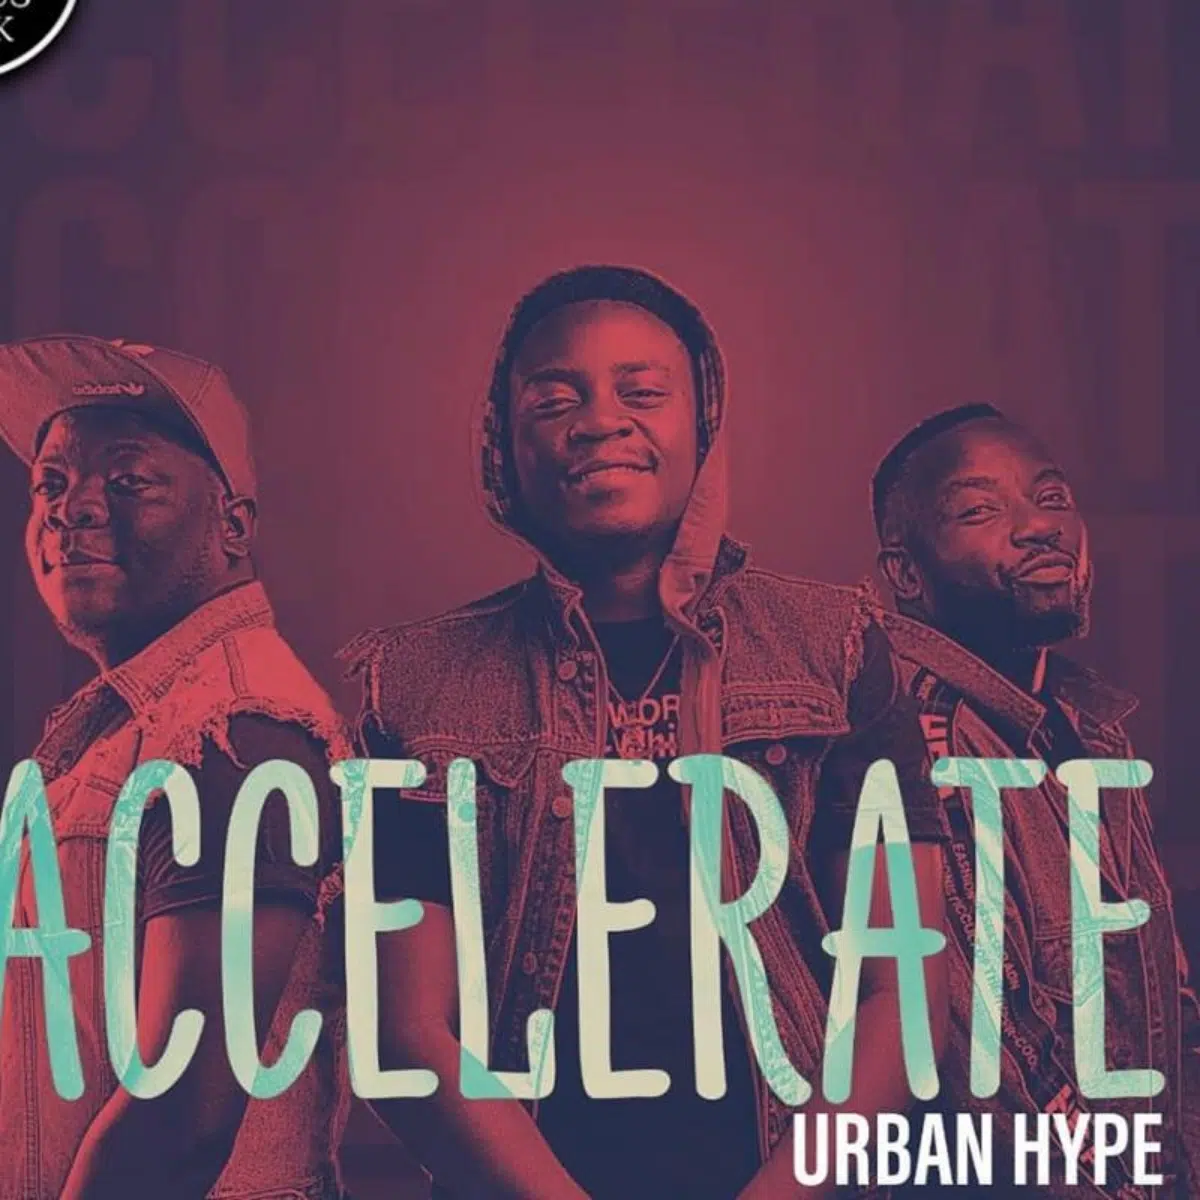 DOWNLOAD: Urban Hype – “Accelerate” Mp3